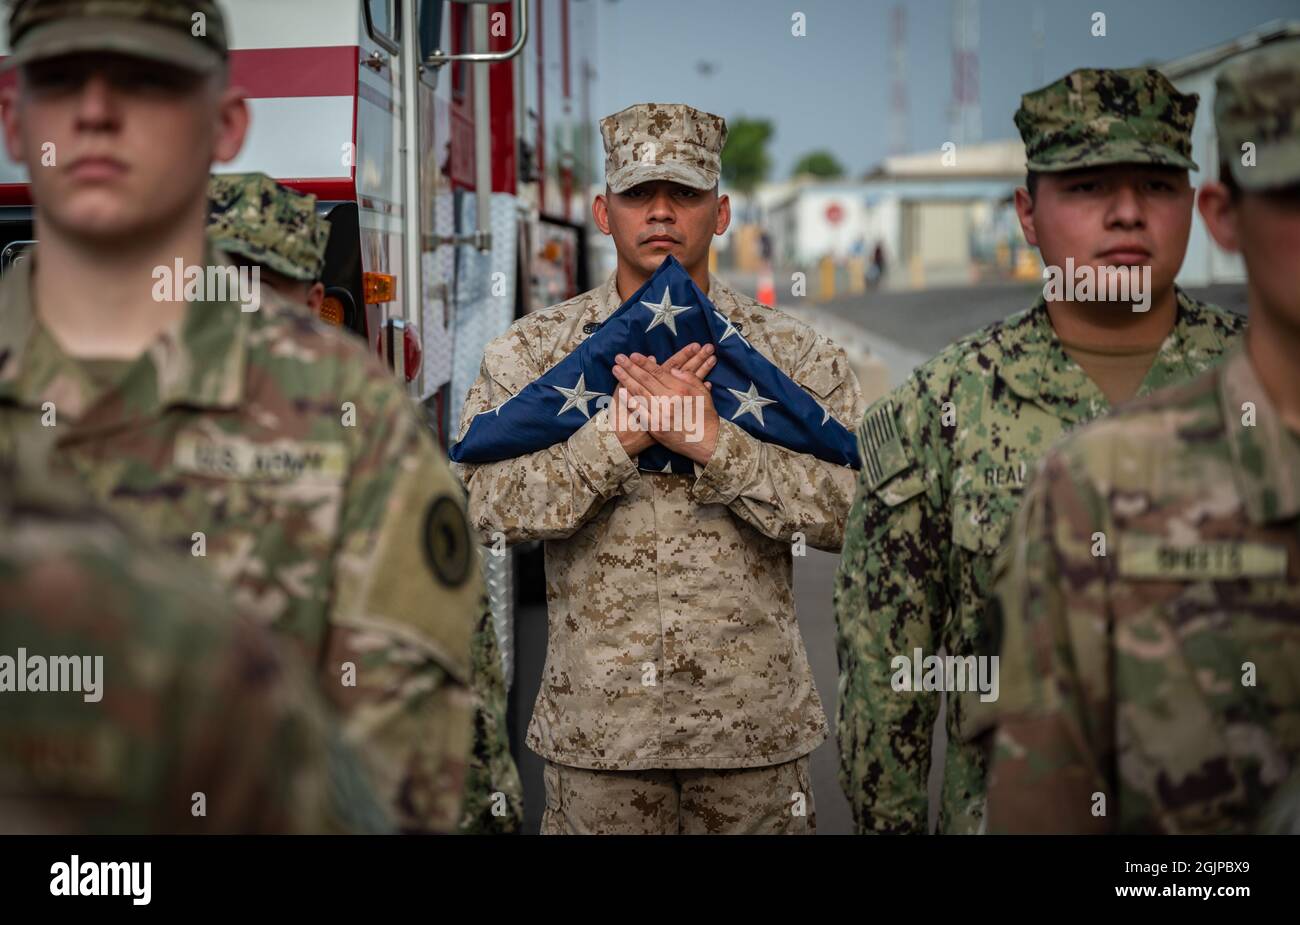 Ambouli, Djibouti. 11th Sep, 2021. U.S. Marine Staff Sgt. Roberto Bravo, center, holds an American flag during a remembrance event on the 20th anniversary of the 9/11 terrorist attacks at Camp Lemonnier September 11, 2021 in Ambouli, Djibouti. The event commemorates the nearly 3,000 people killed by terrorists on September 11th, 2001. Credit: SrA Dwane R. Young/U.S. Air Force/Alamy Live News Stock Photo